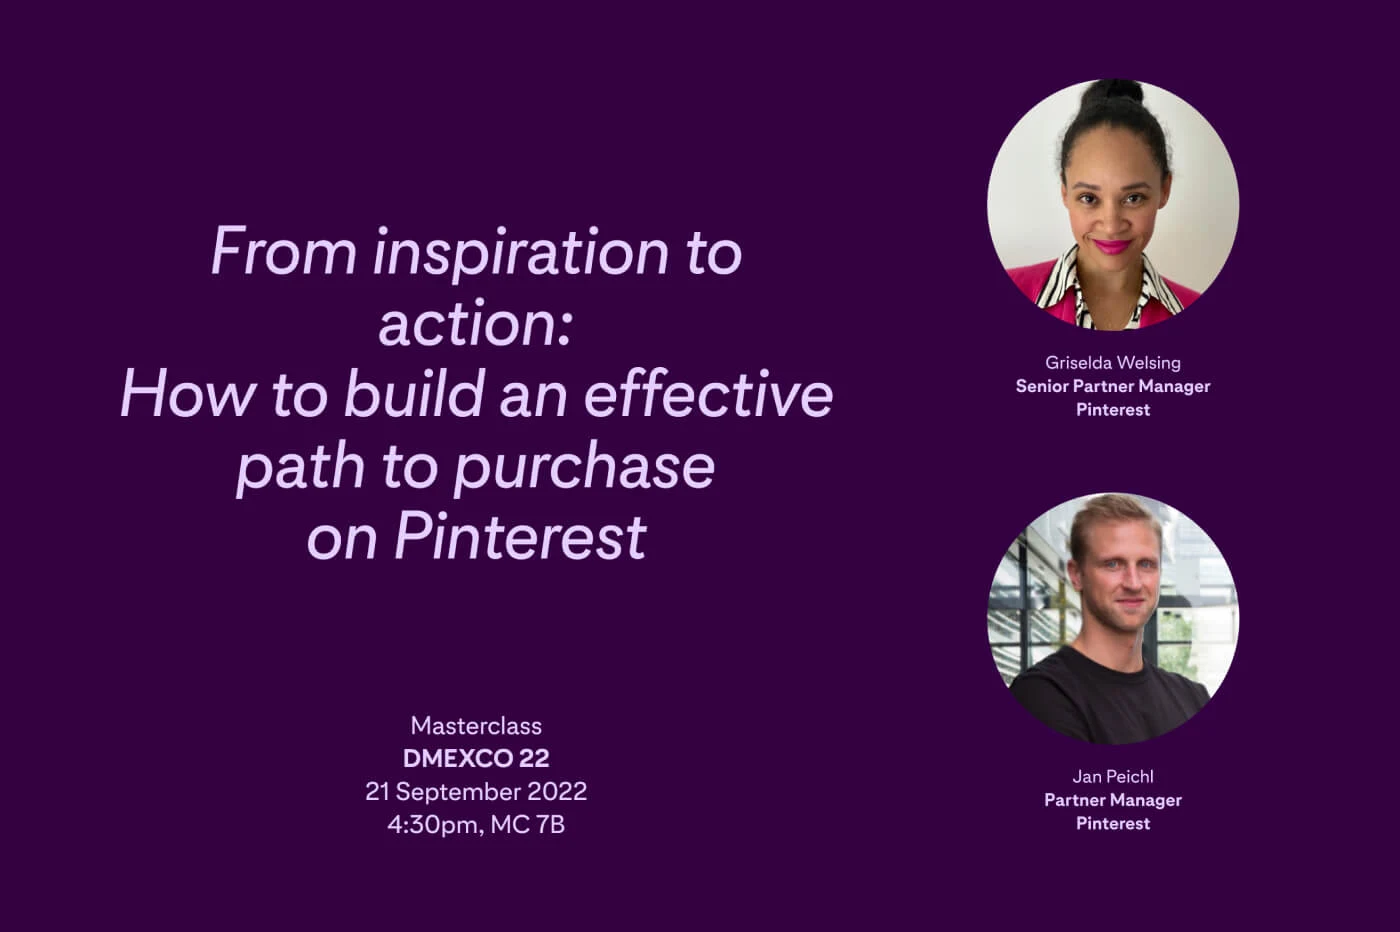 Image advertising the Pinterest at DMEXCO 2022 presentation, titled "From inspiration to action - How to build an effective path to purchase with Griselda Welsing and Jan Peichl"